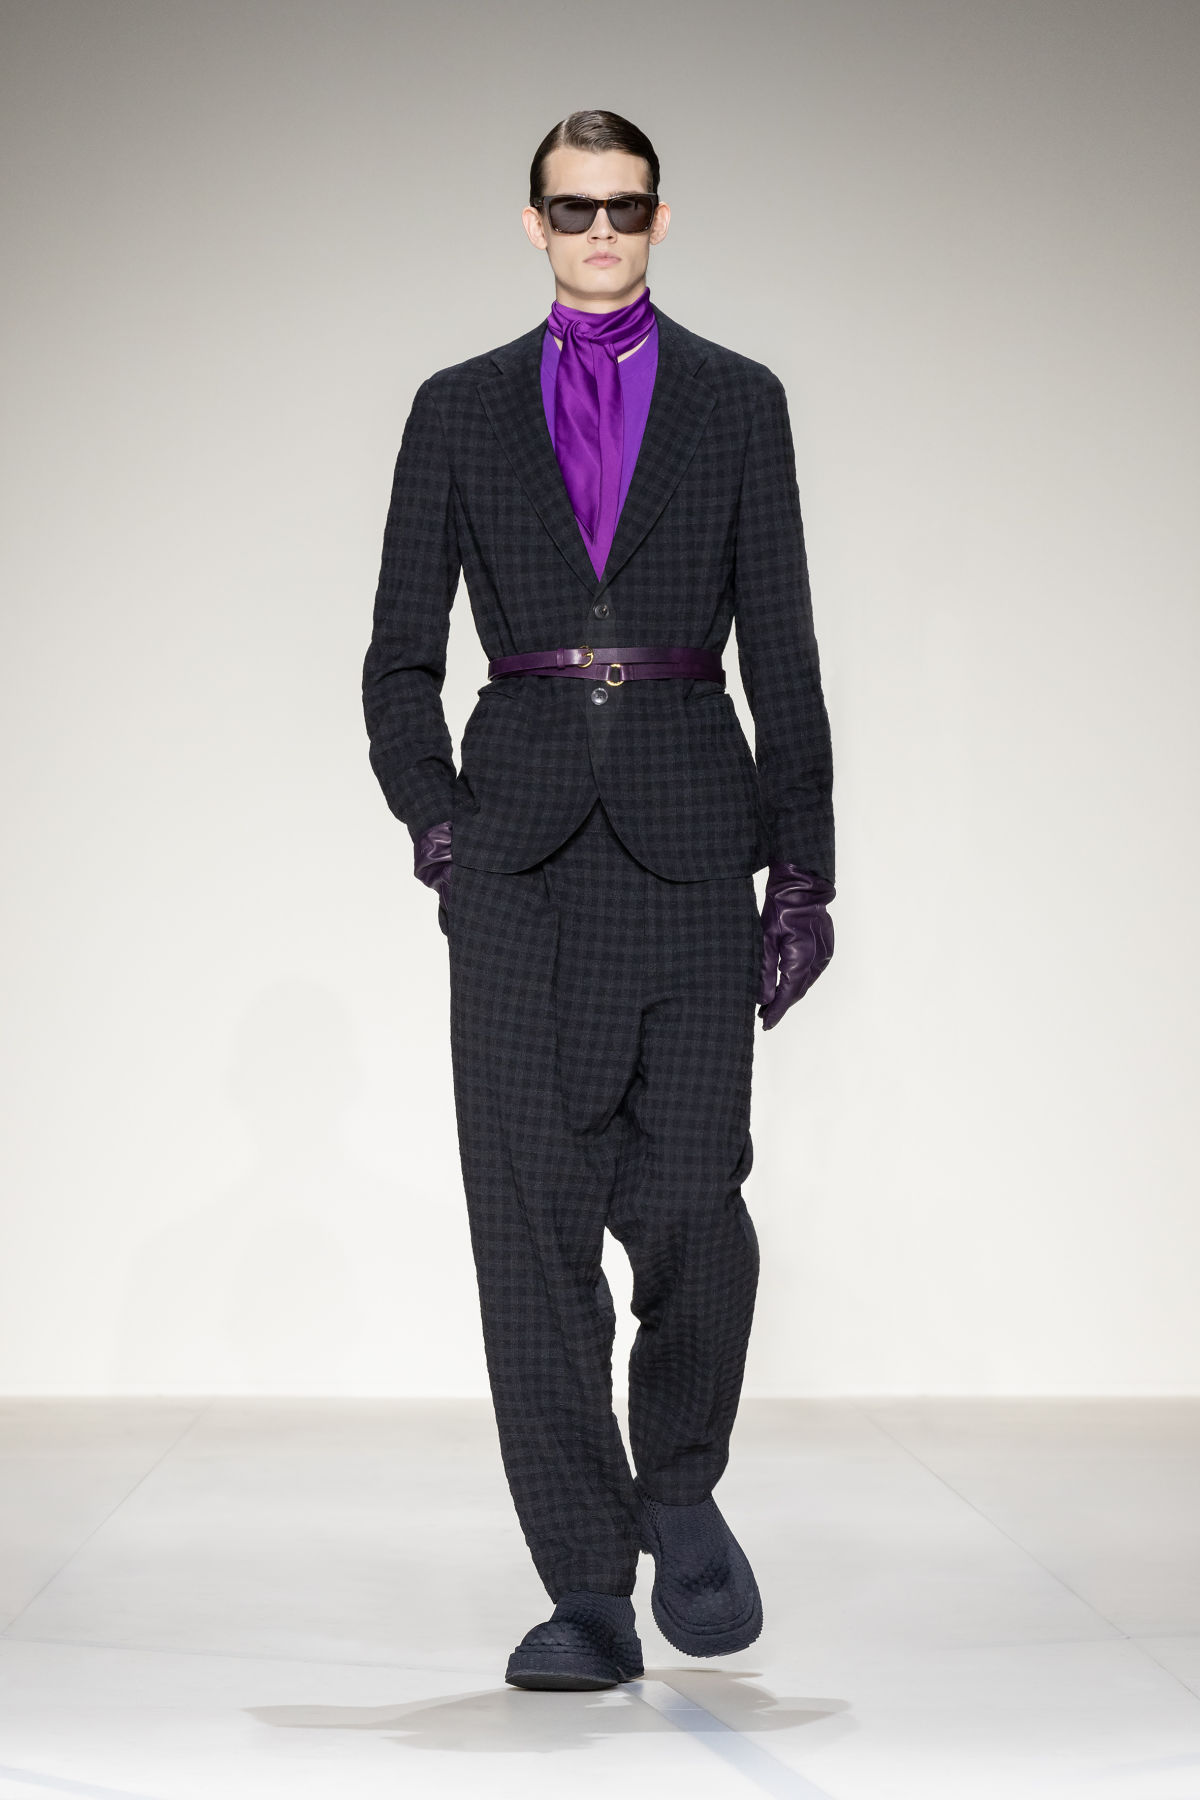 Emporio Armani Presents Its New Autumn Winter 2023/24 Men's Collection: The View From Above